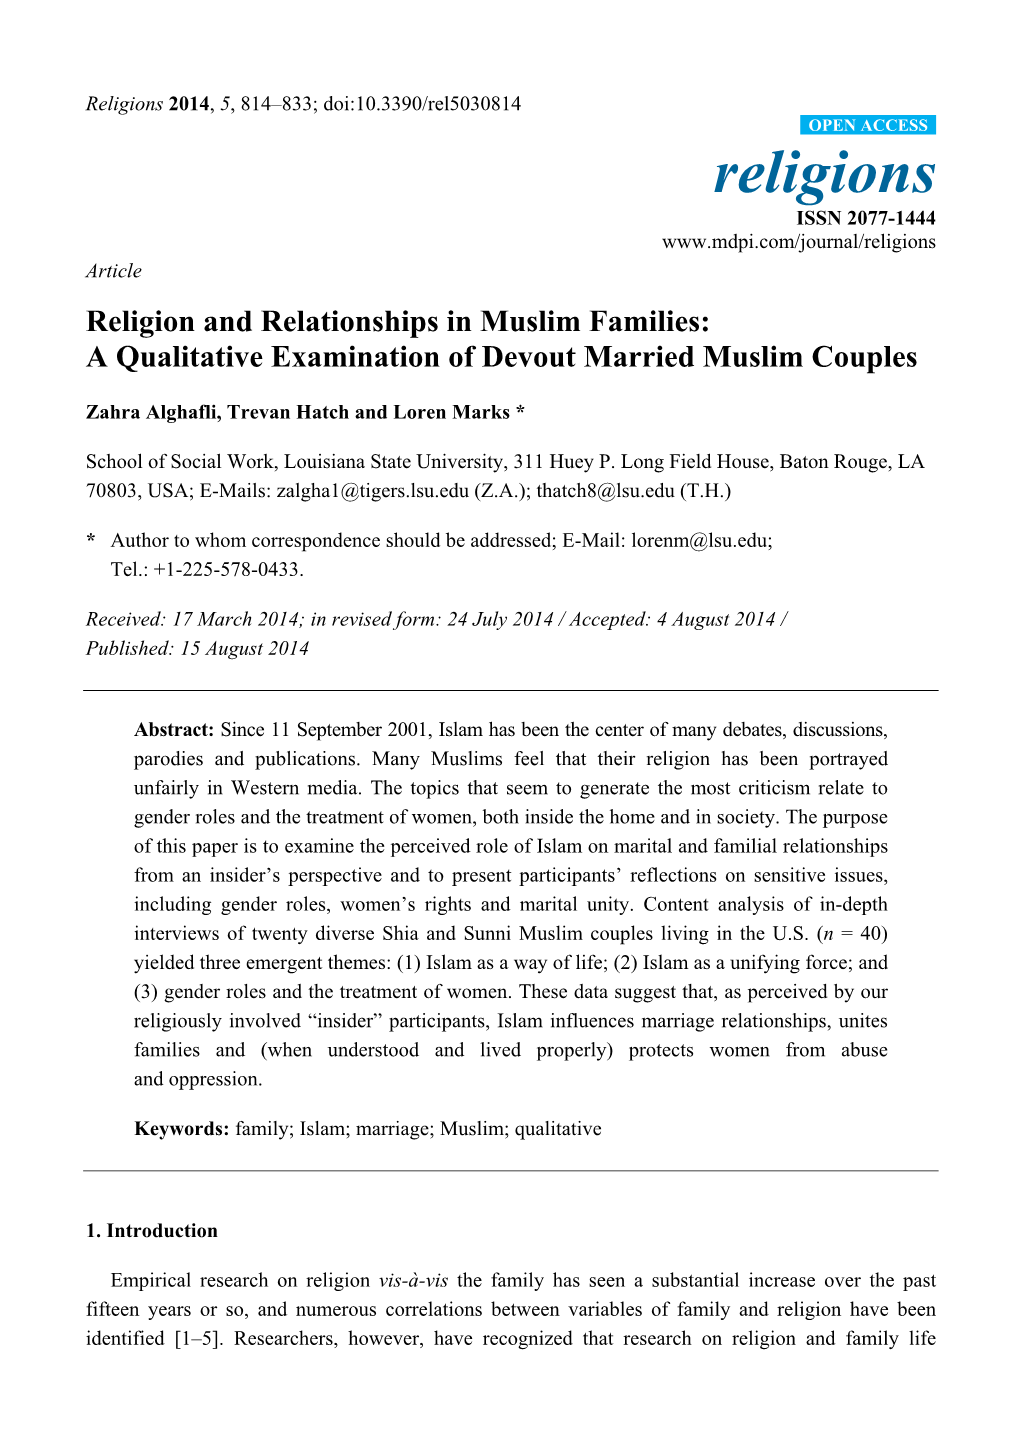 Religion and Relationships in Muslim Families: a Qualitative Examination of Devout Married Muslim Couples